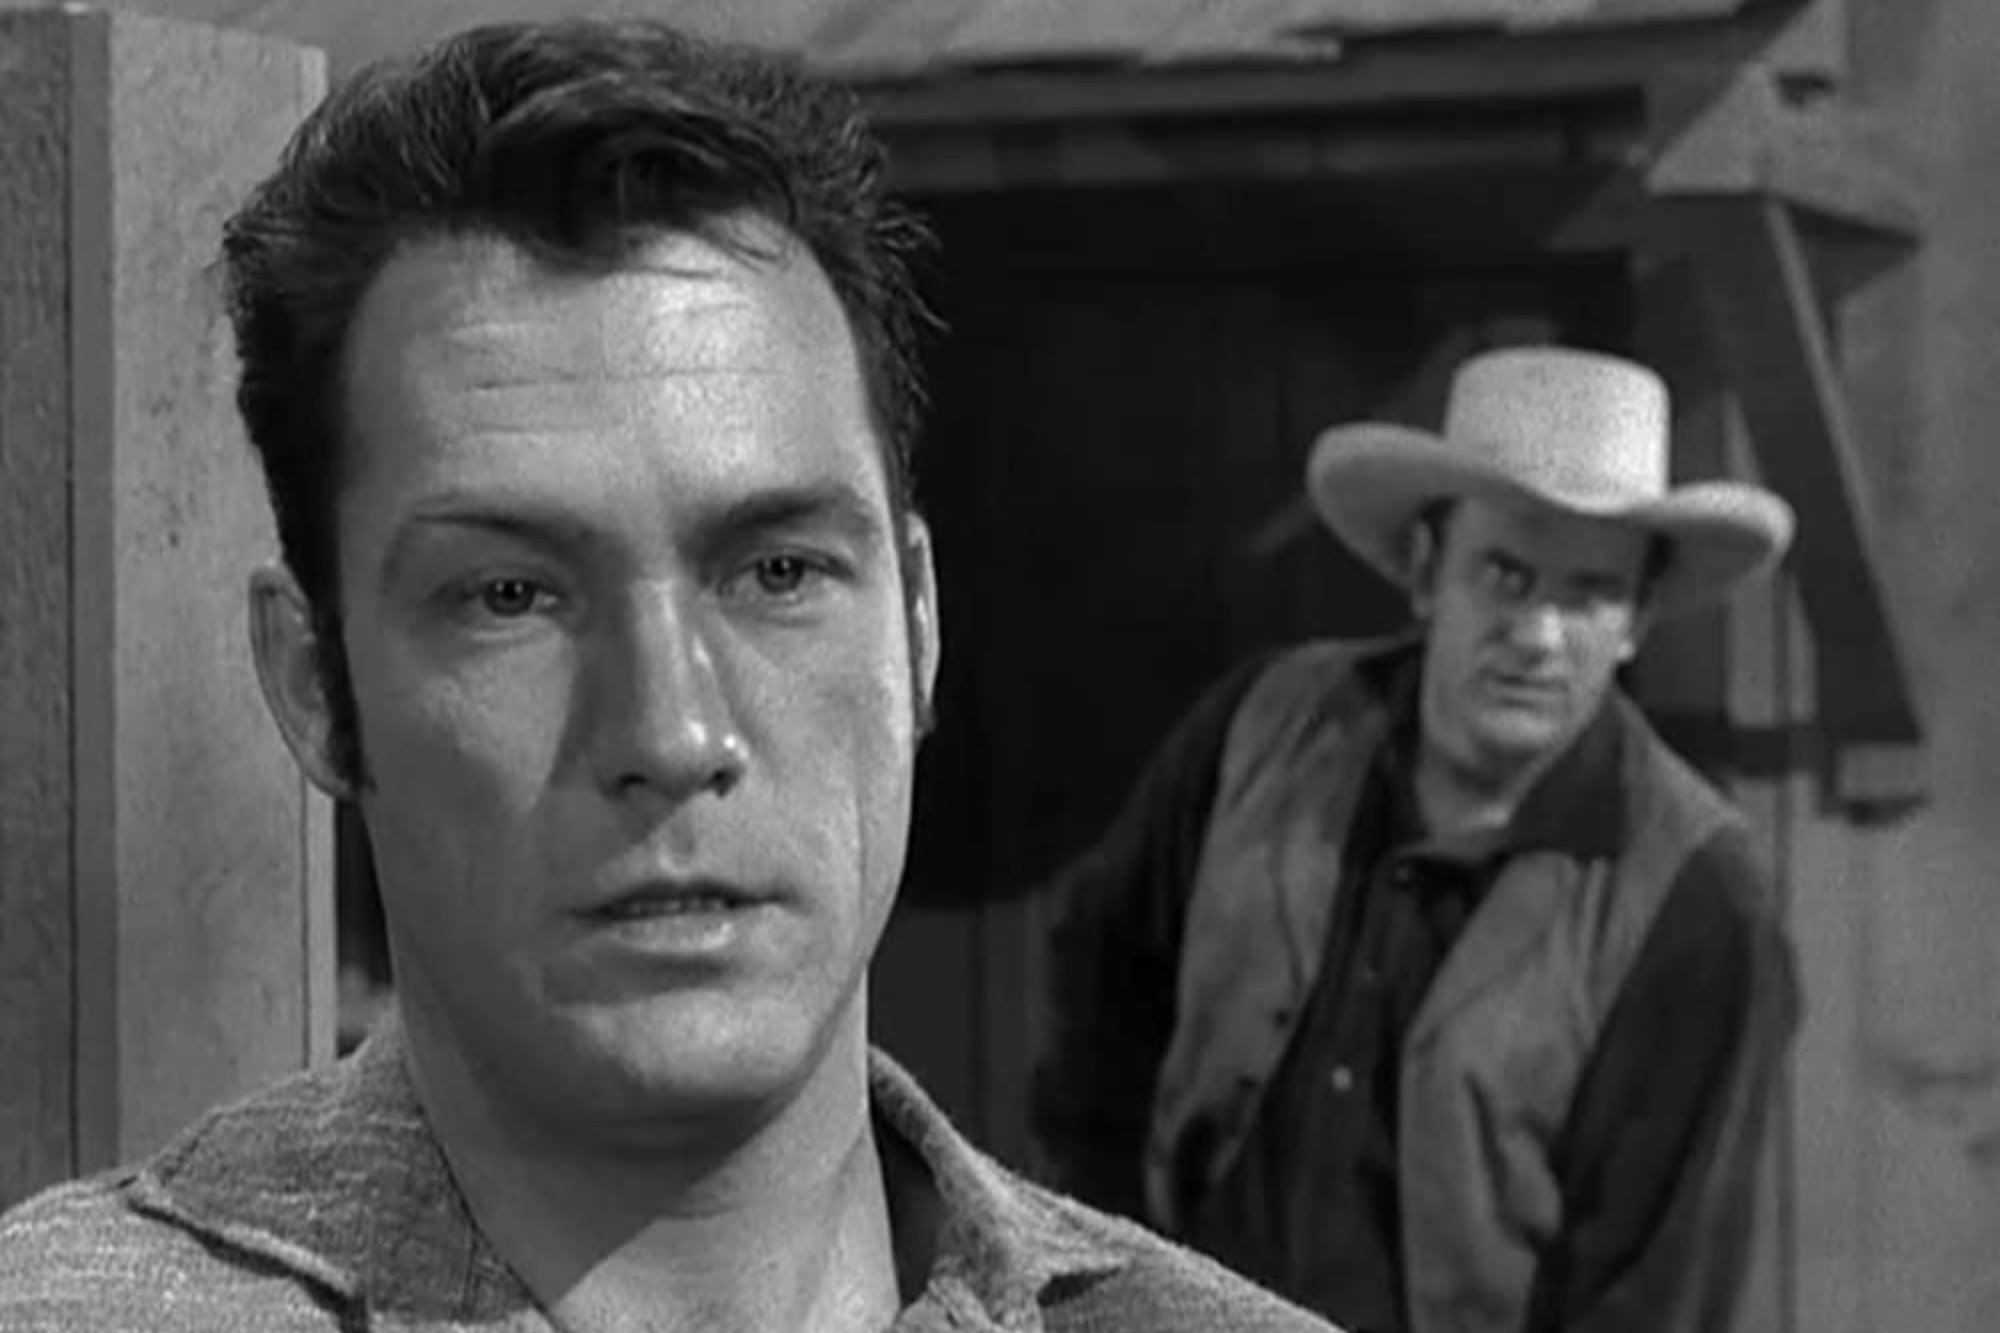 'Gunsmoke' Carl Betz as Nate Timble and James Arness as Matt Dillon. Arness is sneaking up behind him, while Betz is looking into the camera.